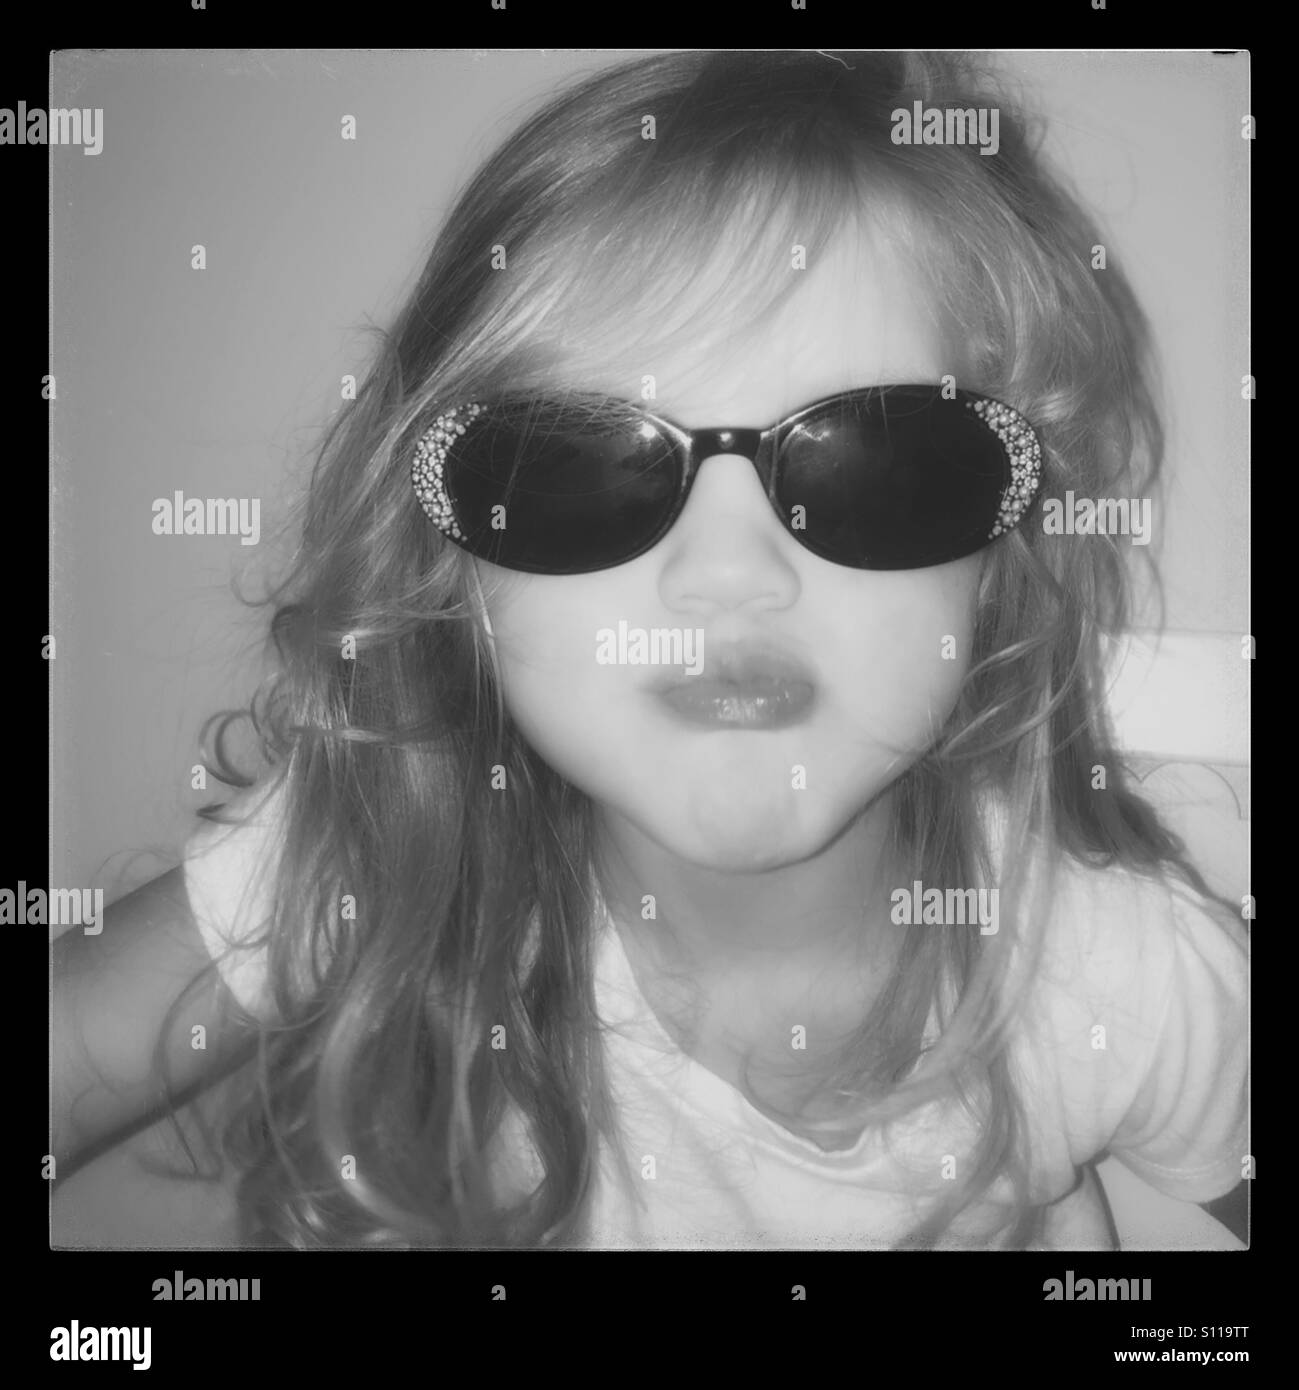 Little girl wearing black sunglasses with rhinestones, making a face Stock Photo